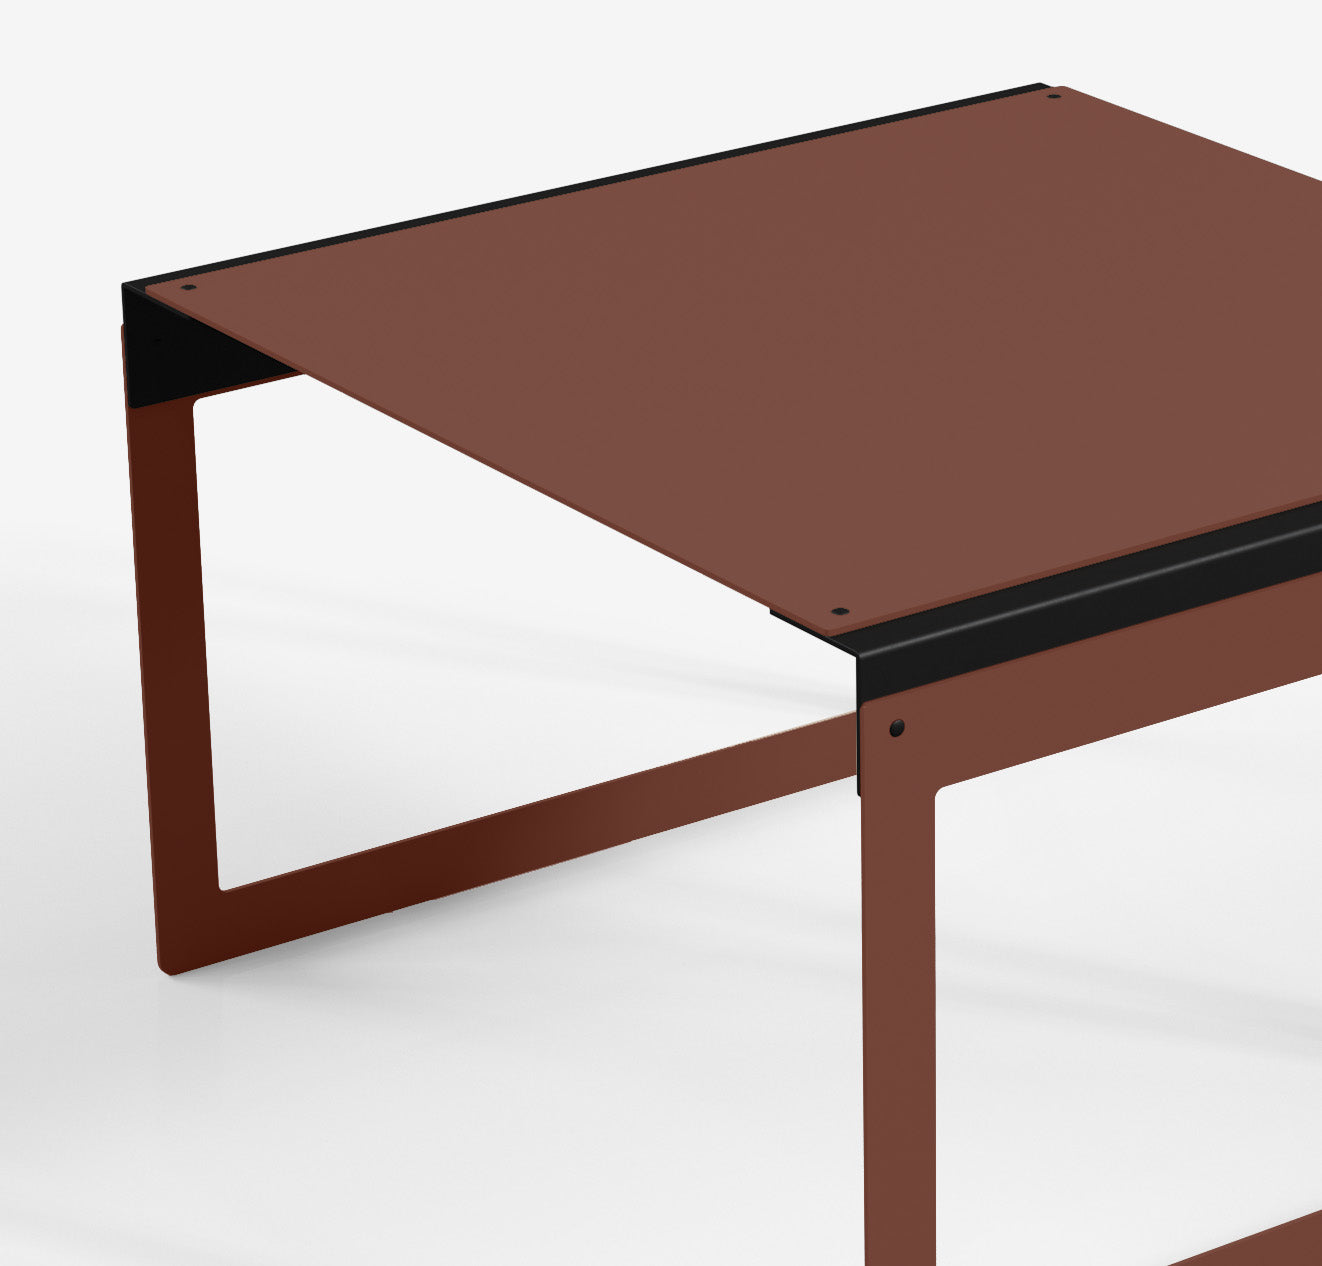 Connect - Coffee Table / XL (Frame, RedBrown)